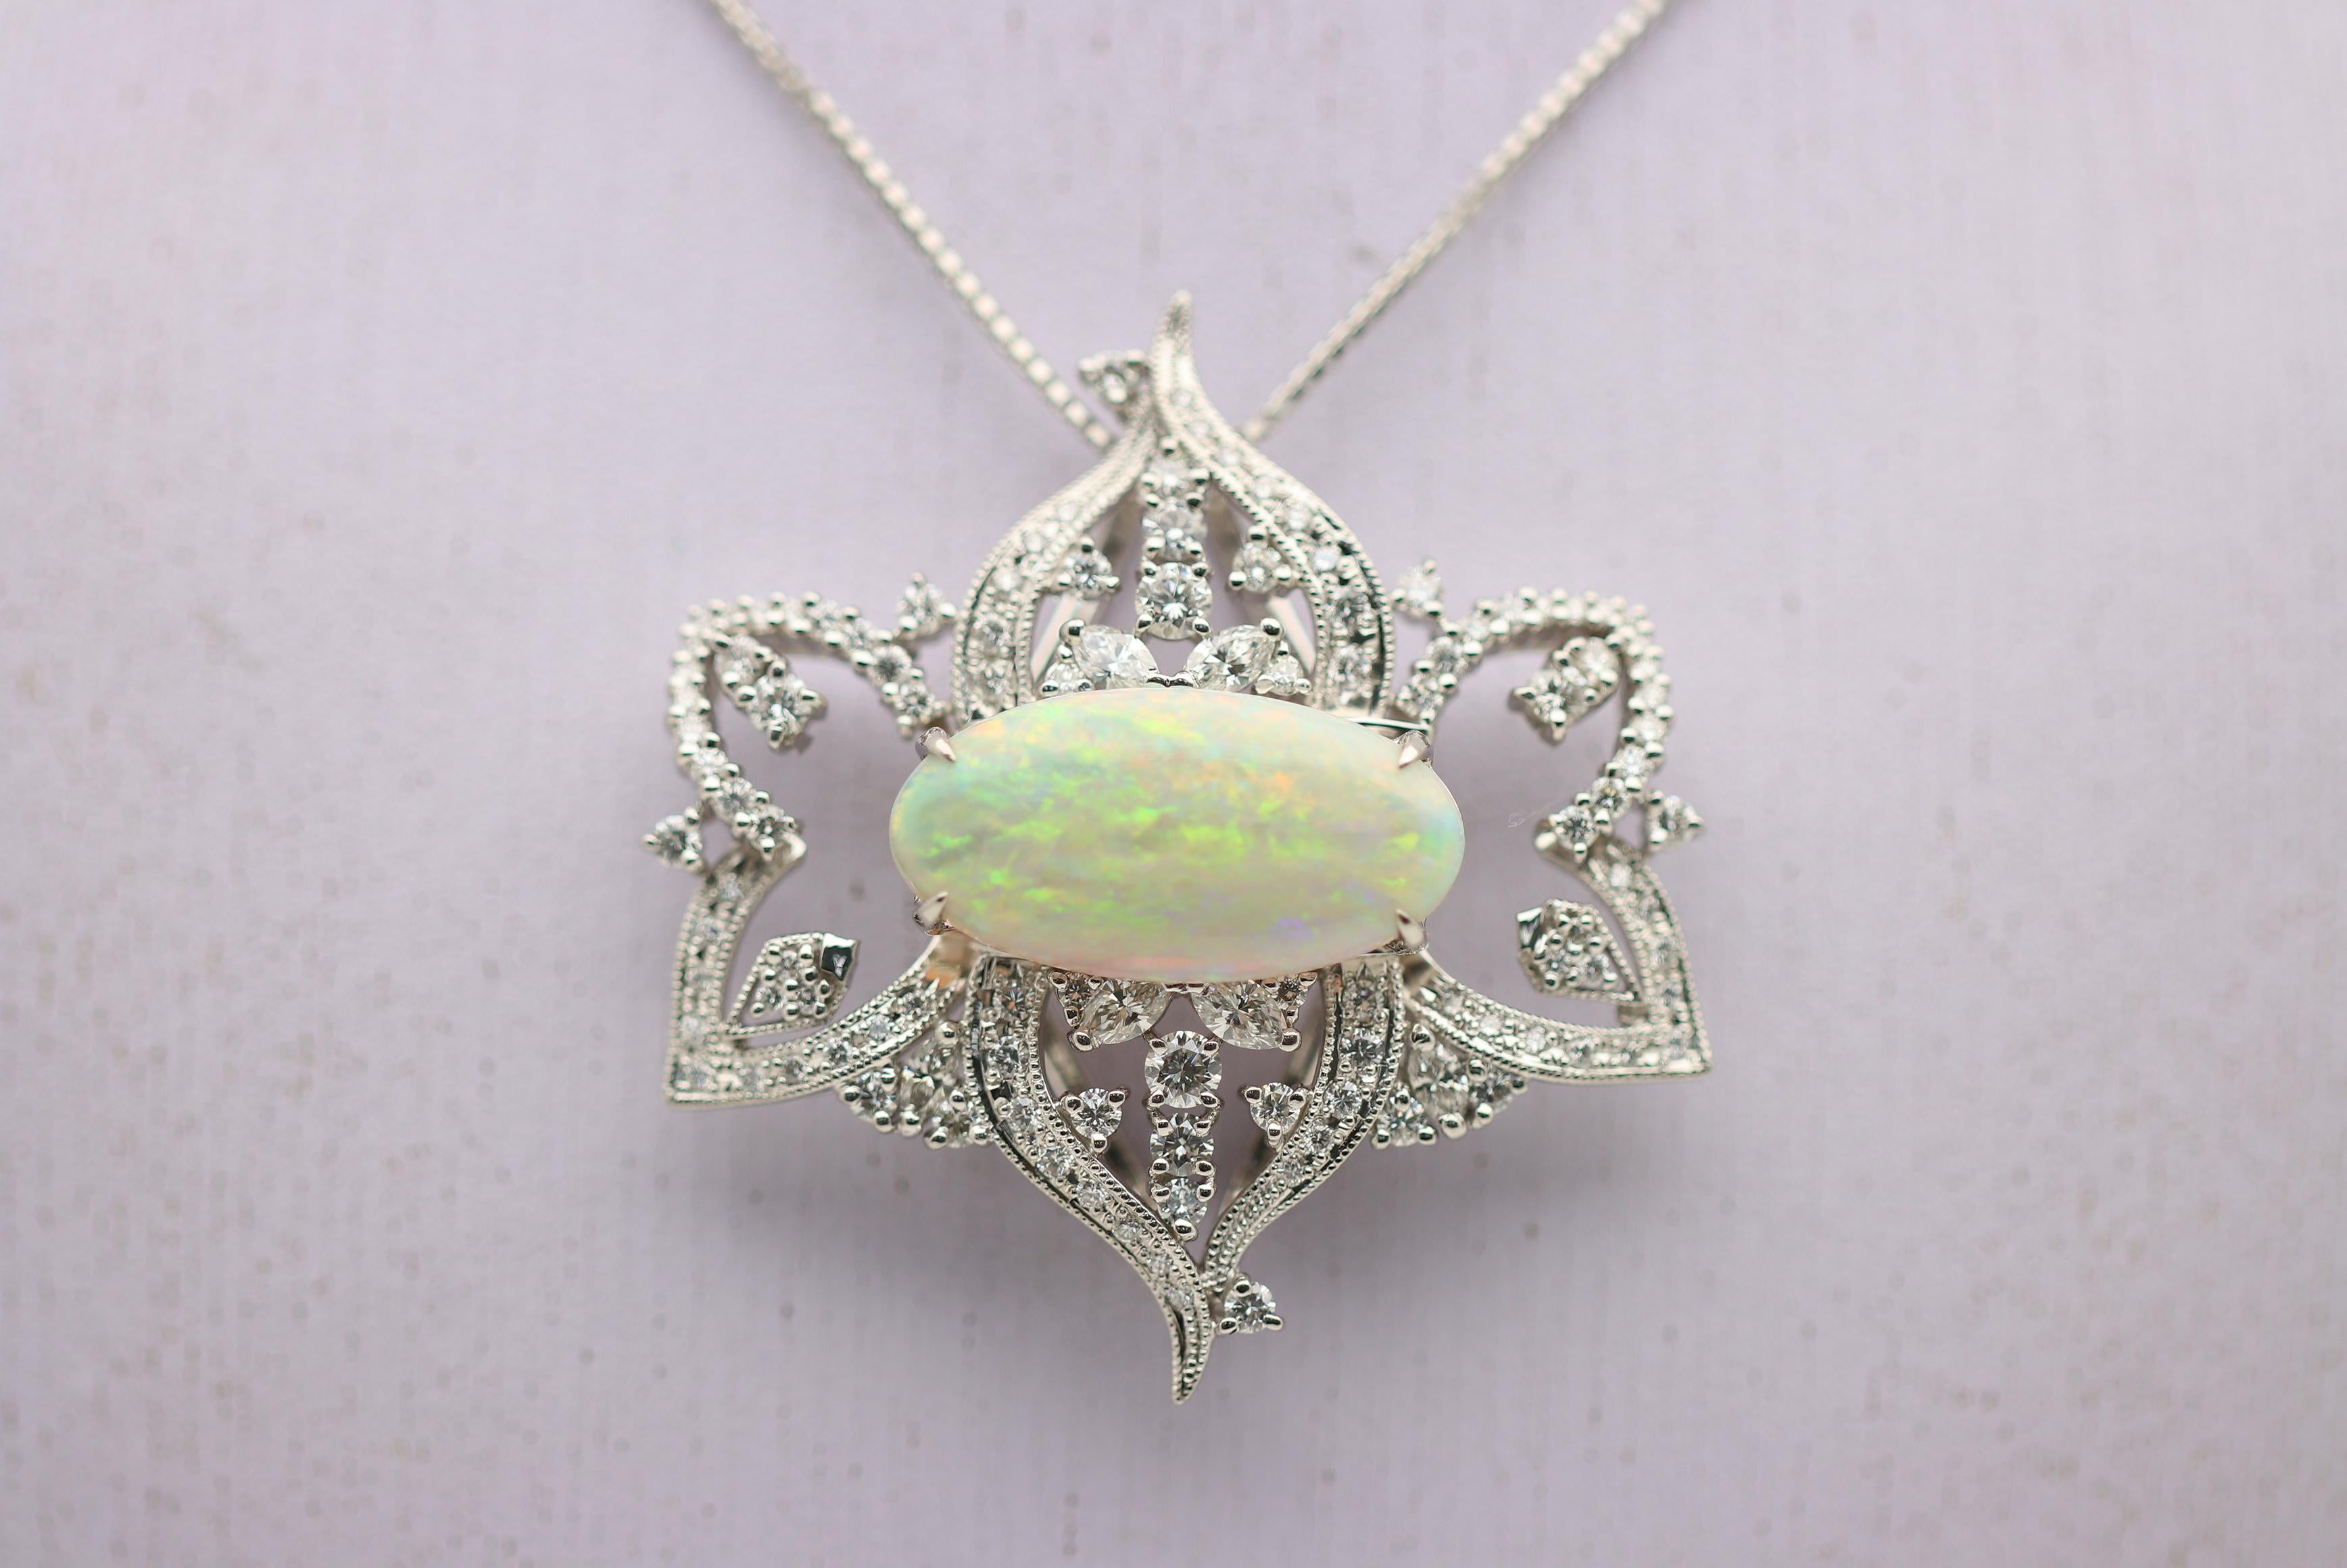 A large and impressive pendant featuring a 6.70 carat Australian opal with excellent play-of-color. The opal displays a wide range of colors which include red, orange, green, yellow and blue, which all dance across the stone as it is moved in the